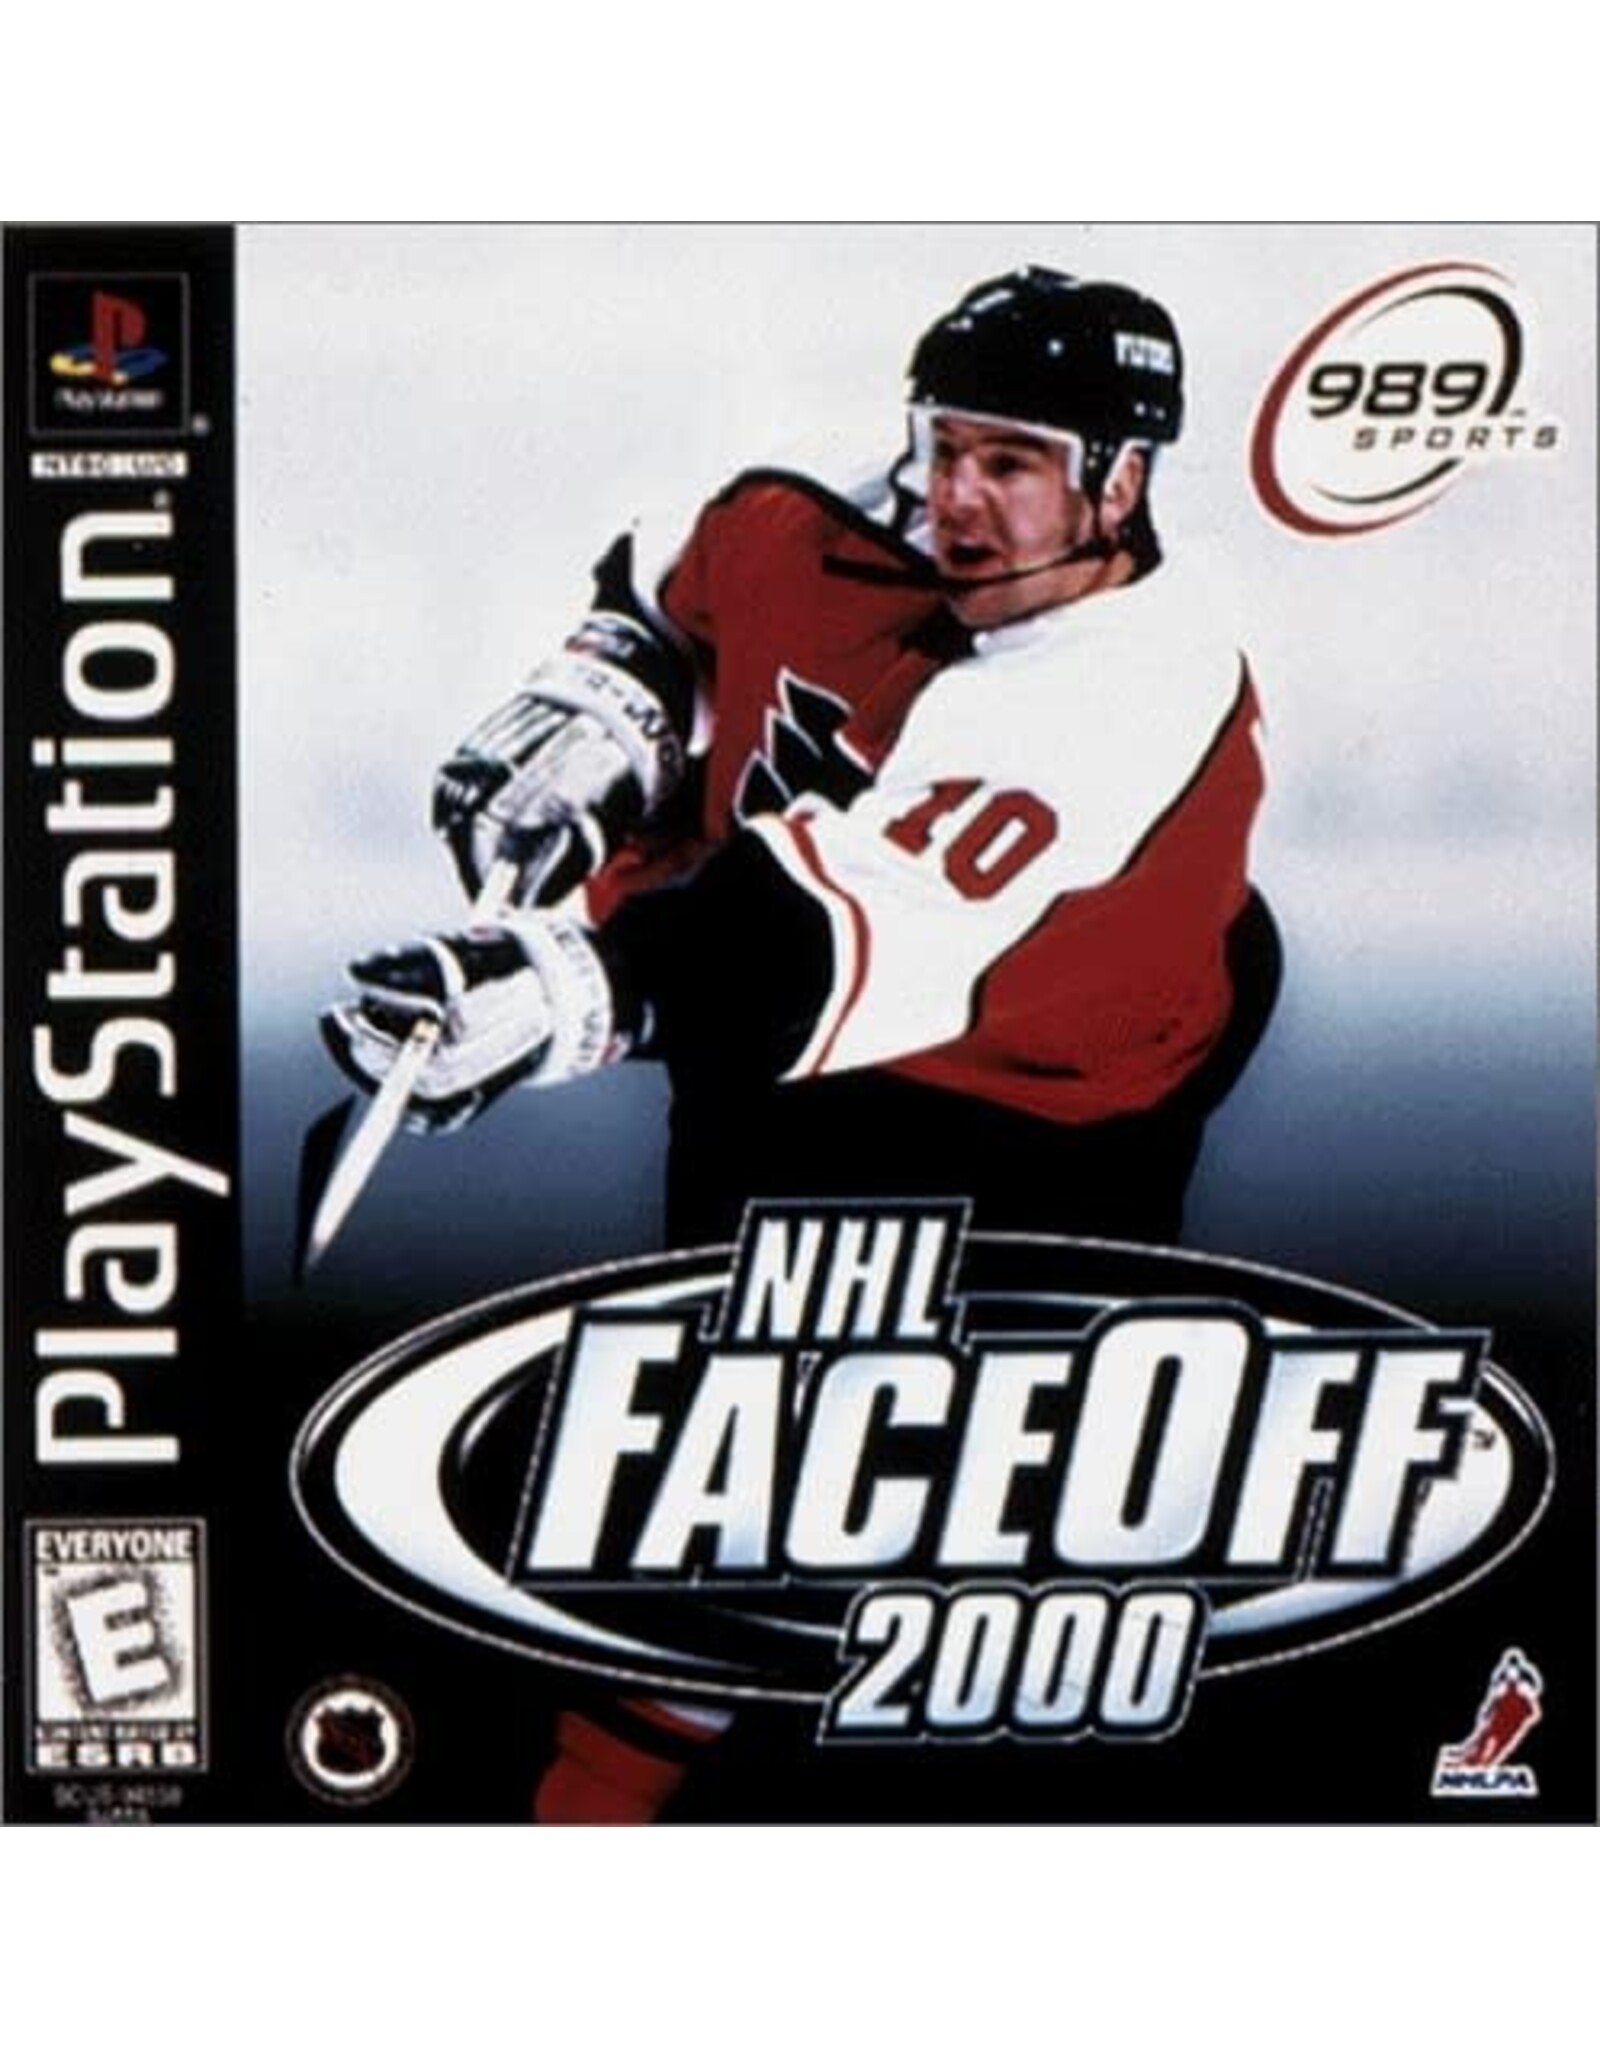 Playstation NHL FaceOff 2000 (Used, Cosmetic Damage)